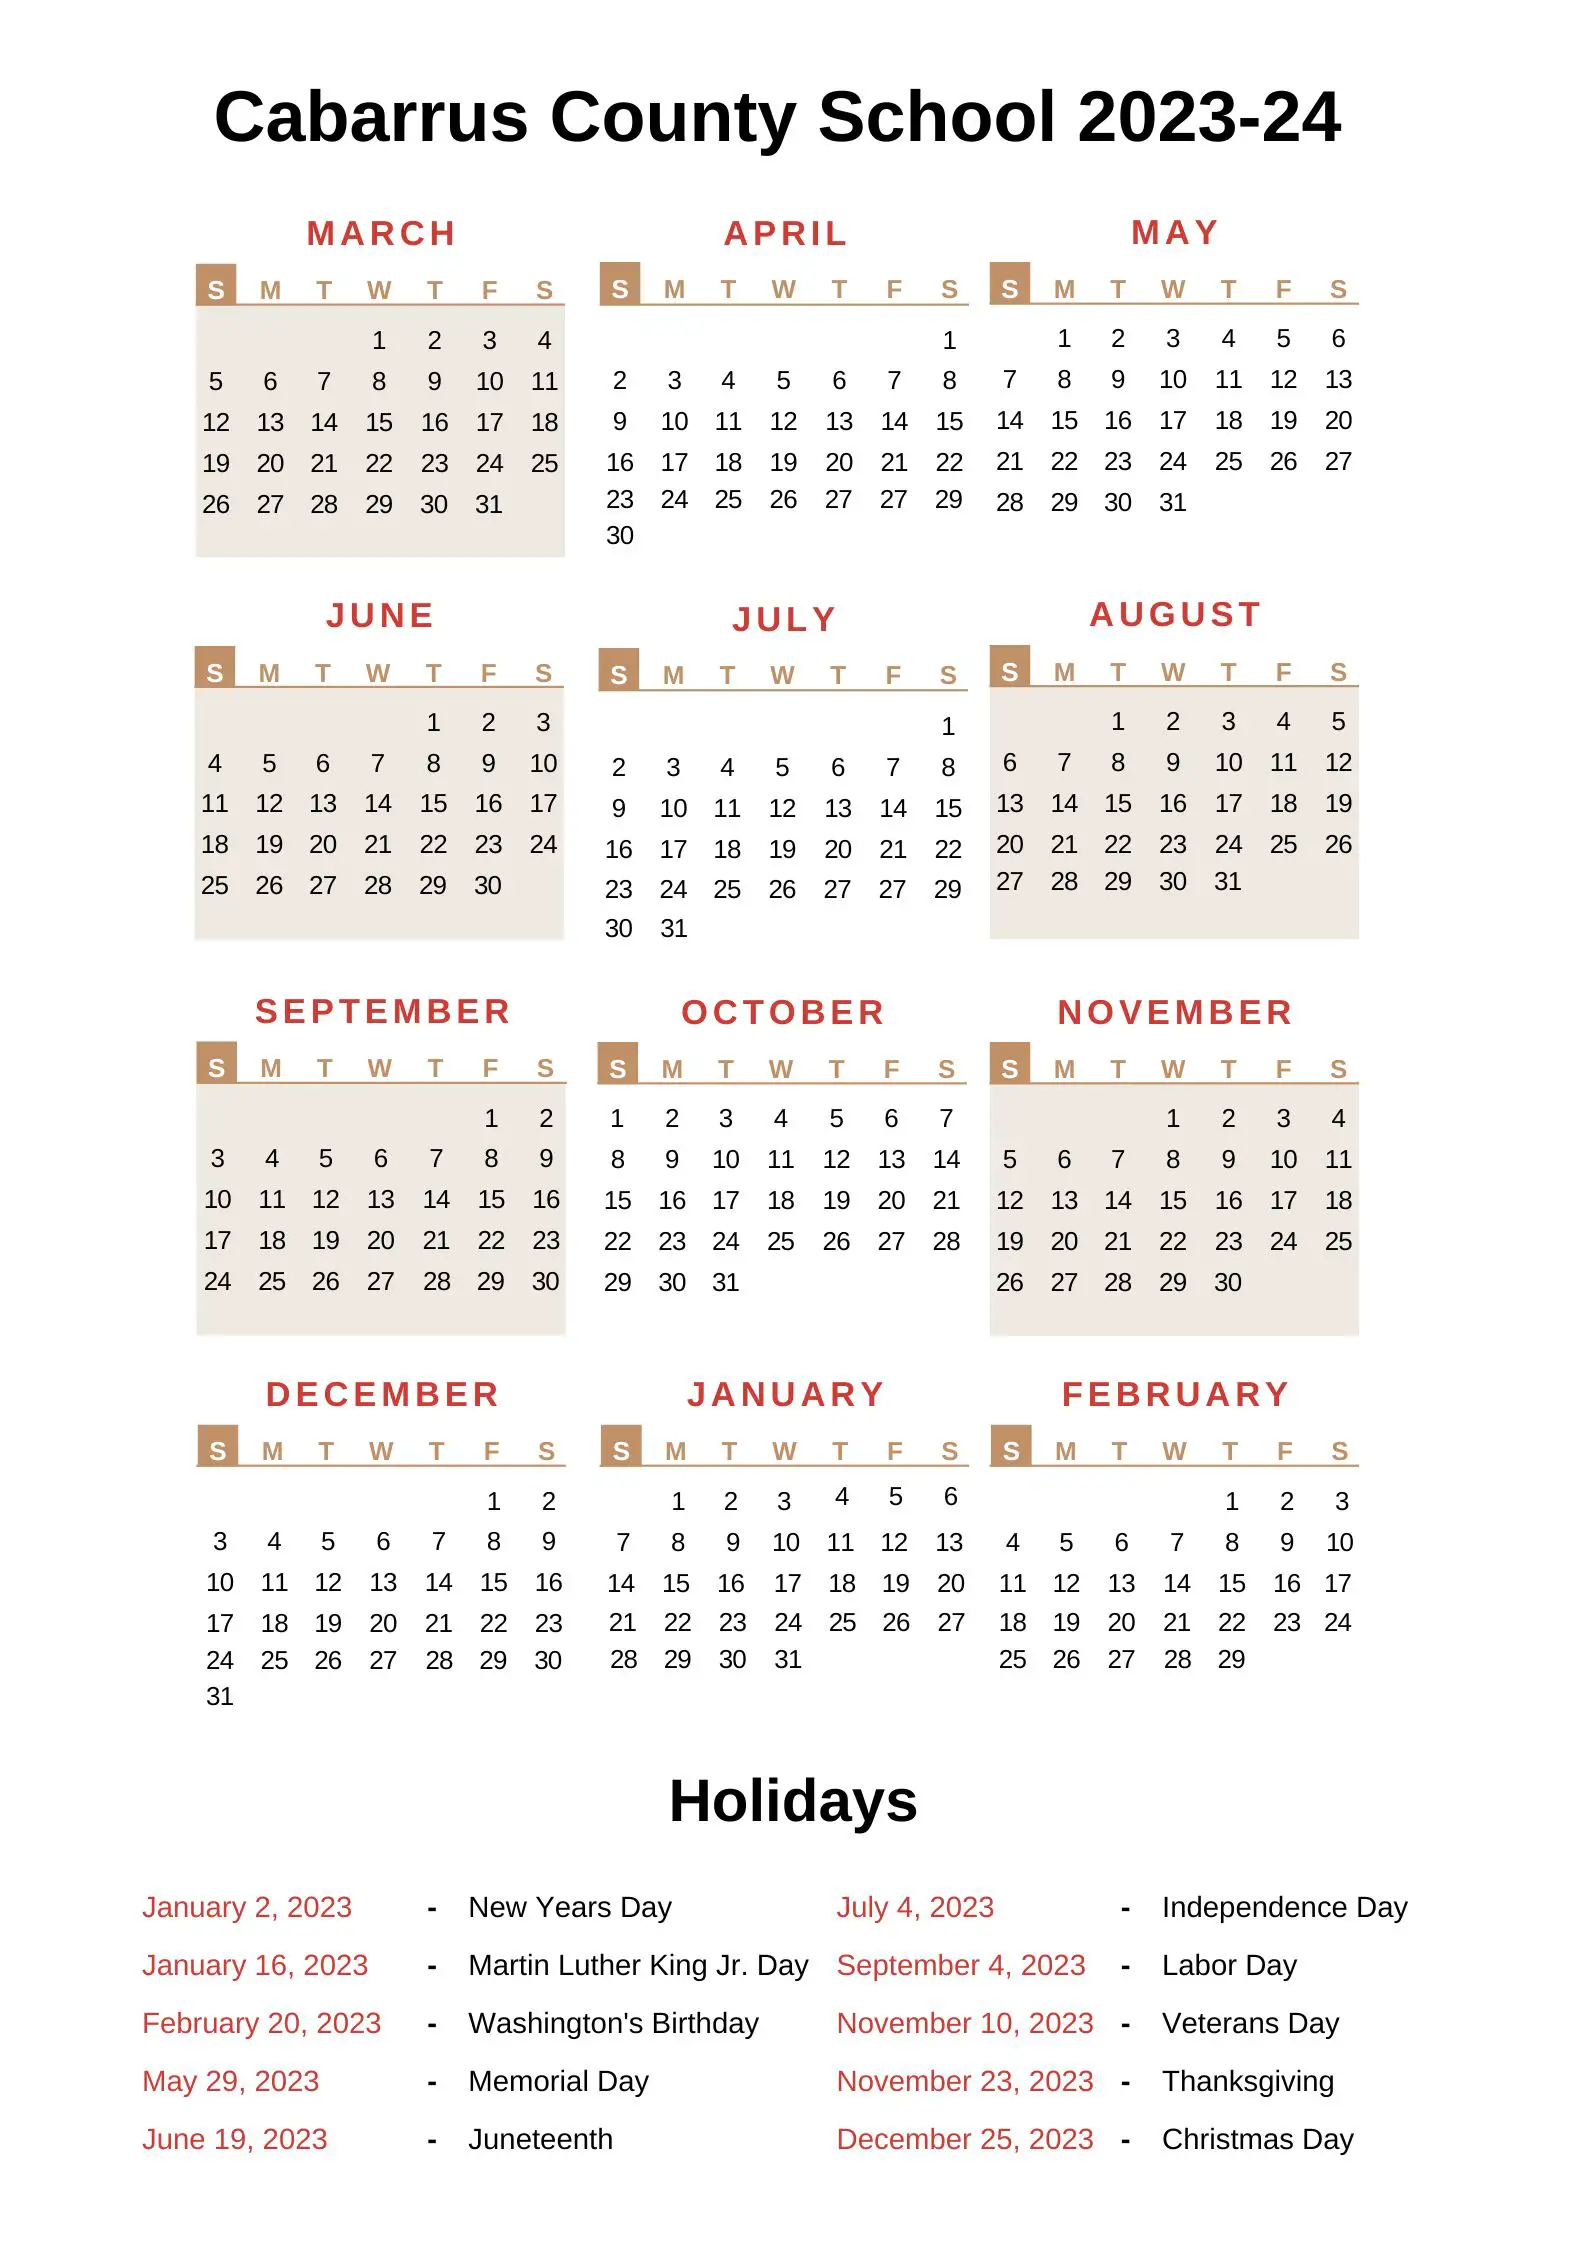 Cabarrus County Schools Calendar 2023 24 with Holidays